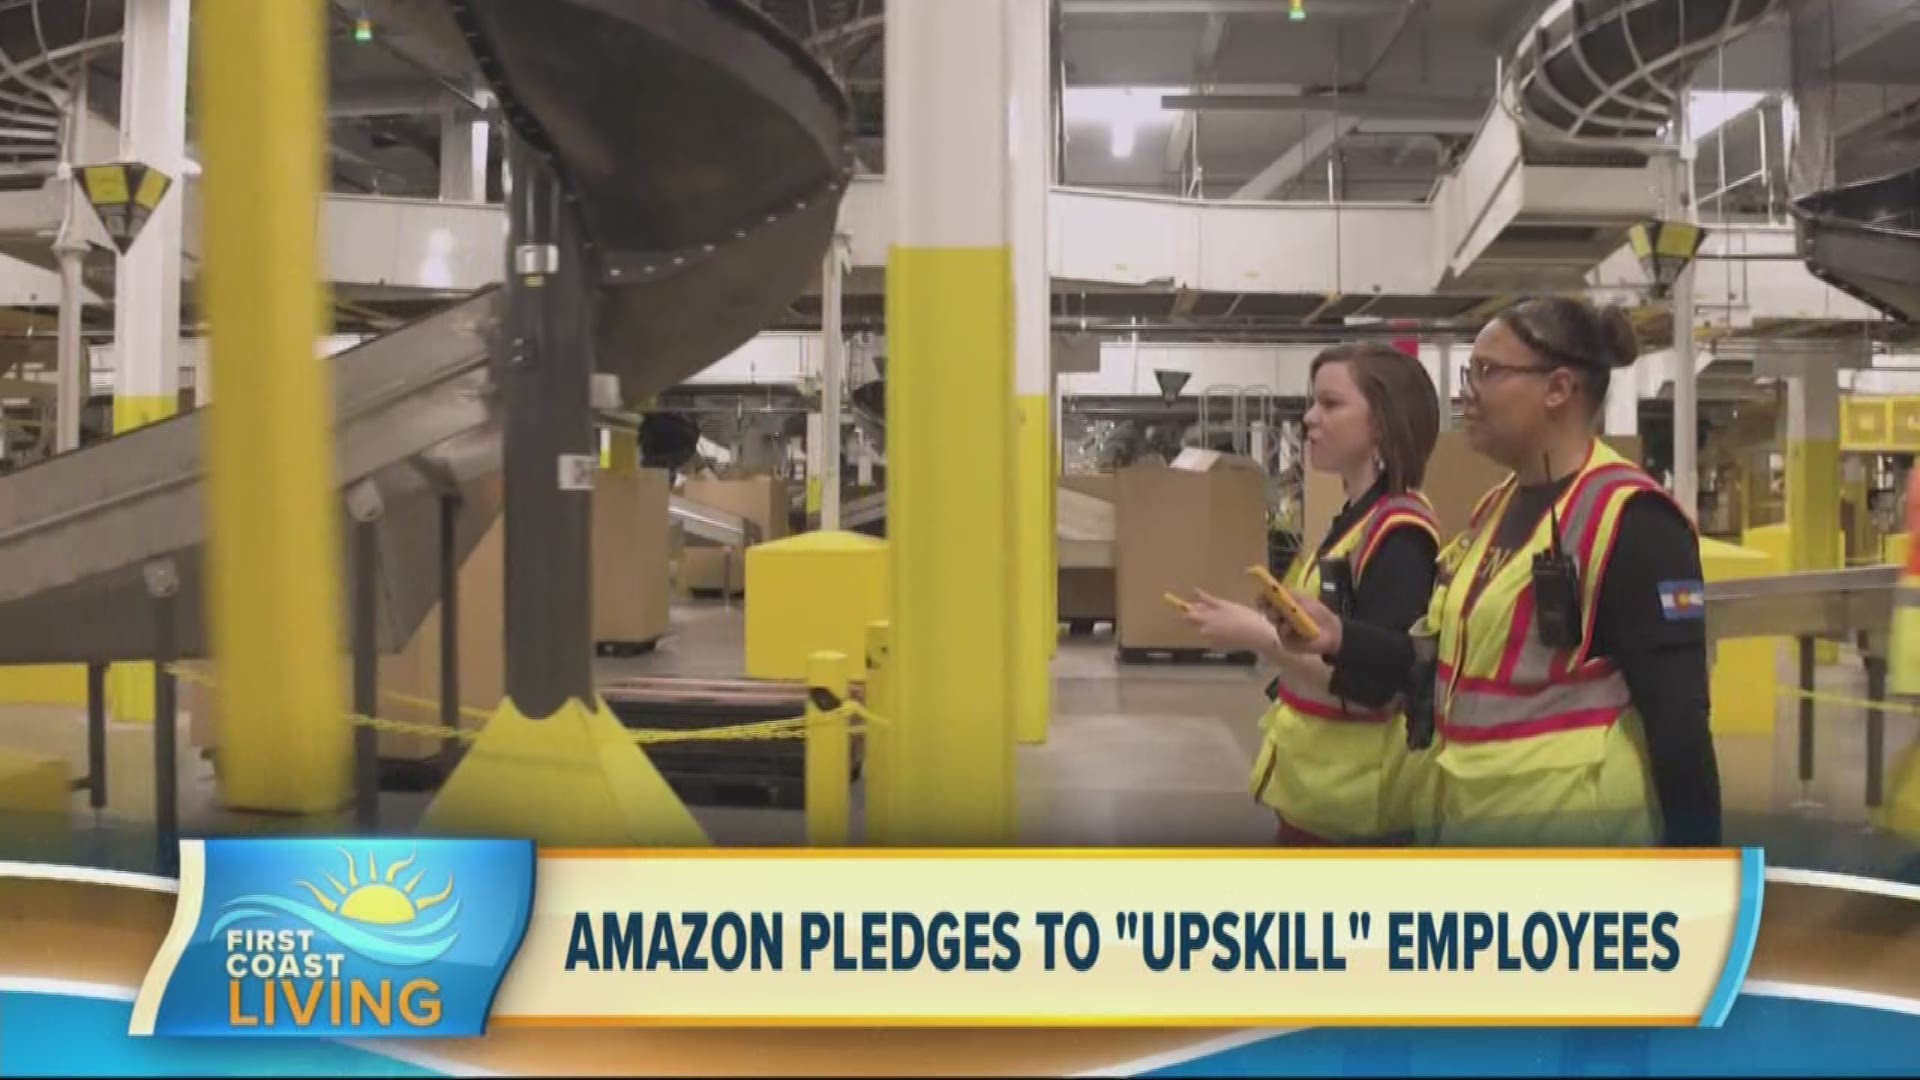 Amazon announces a large-scale workforce development commitment to 'upskill' their employees.